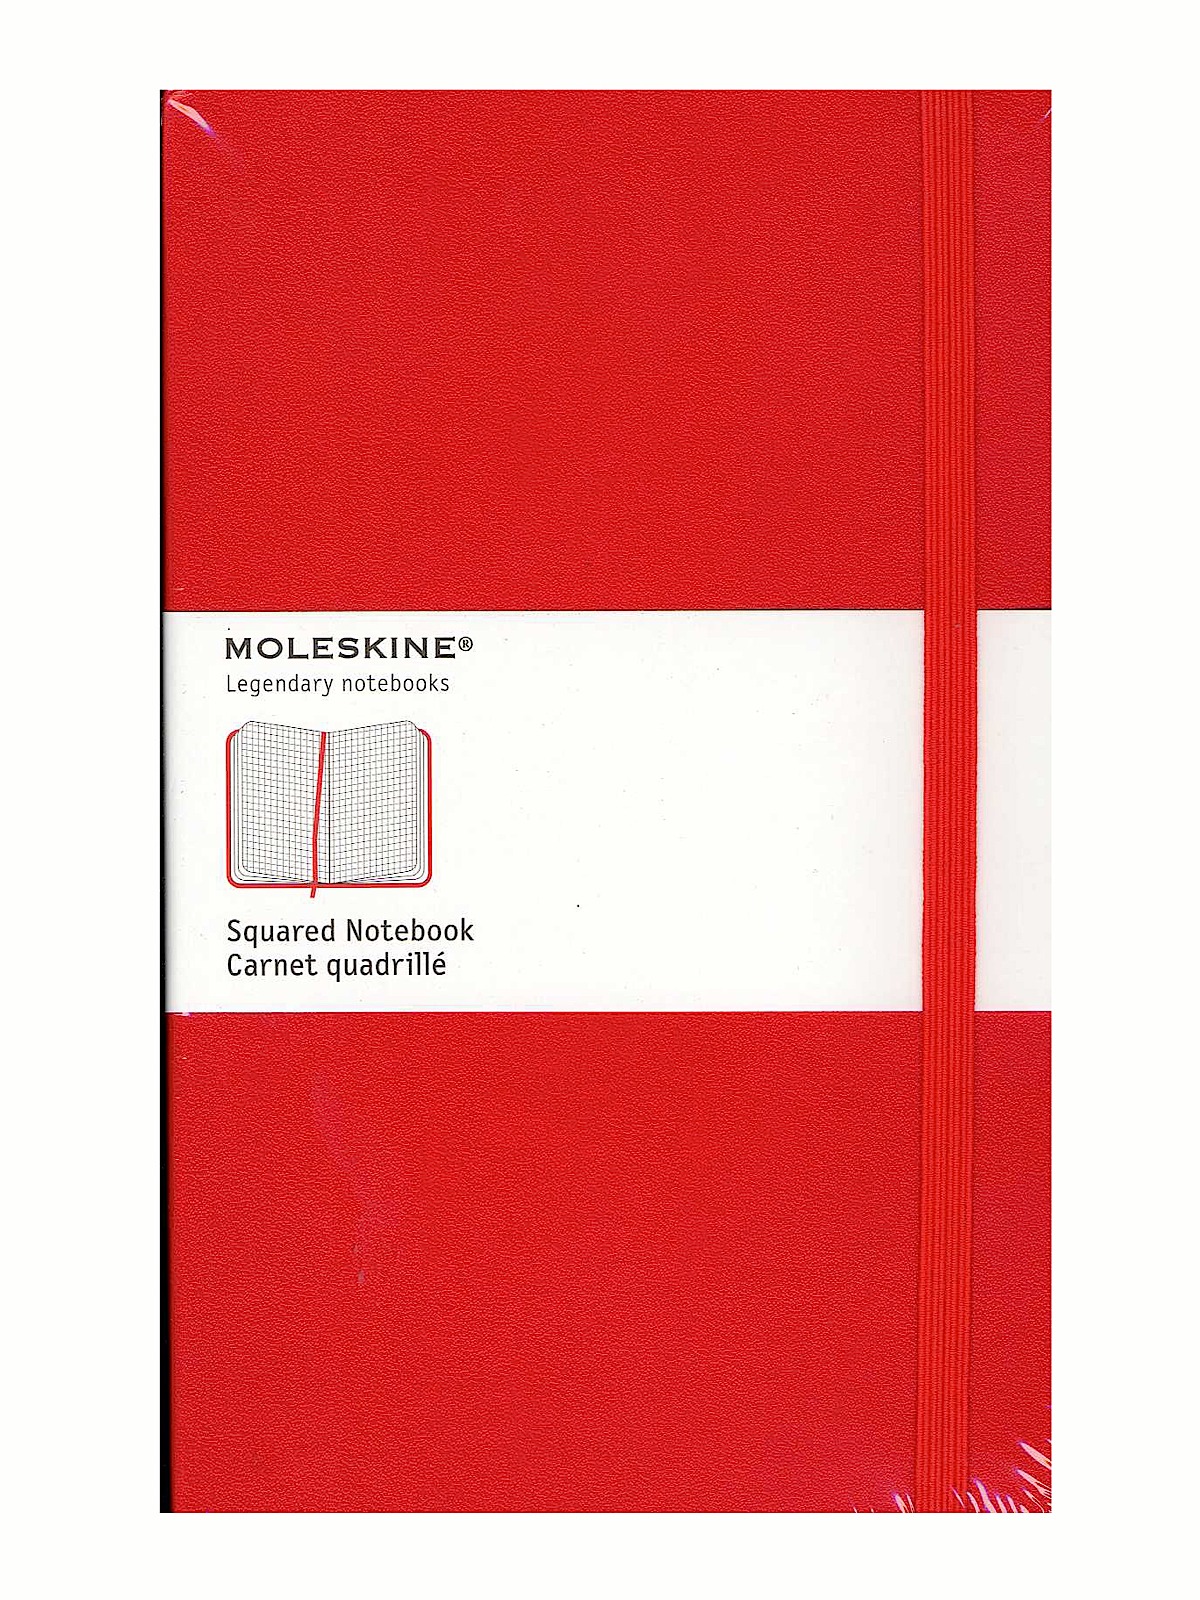 Classic Hard Cover Notebooks Red 5 In. X 8 1 4 In. 240 Pages, Squared